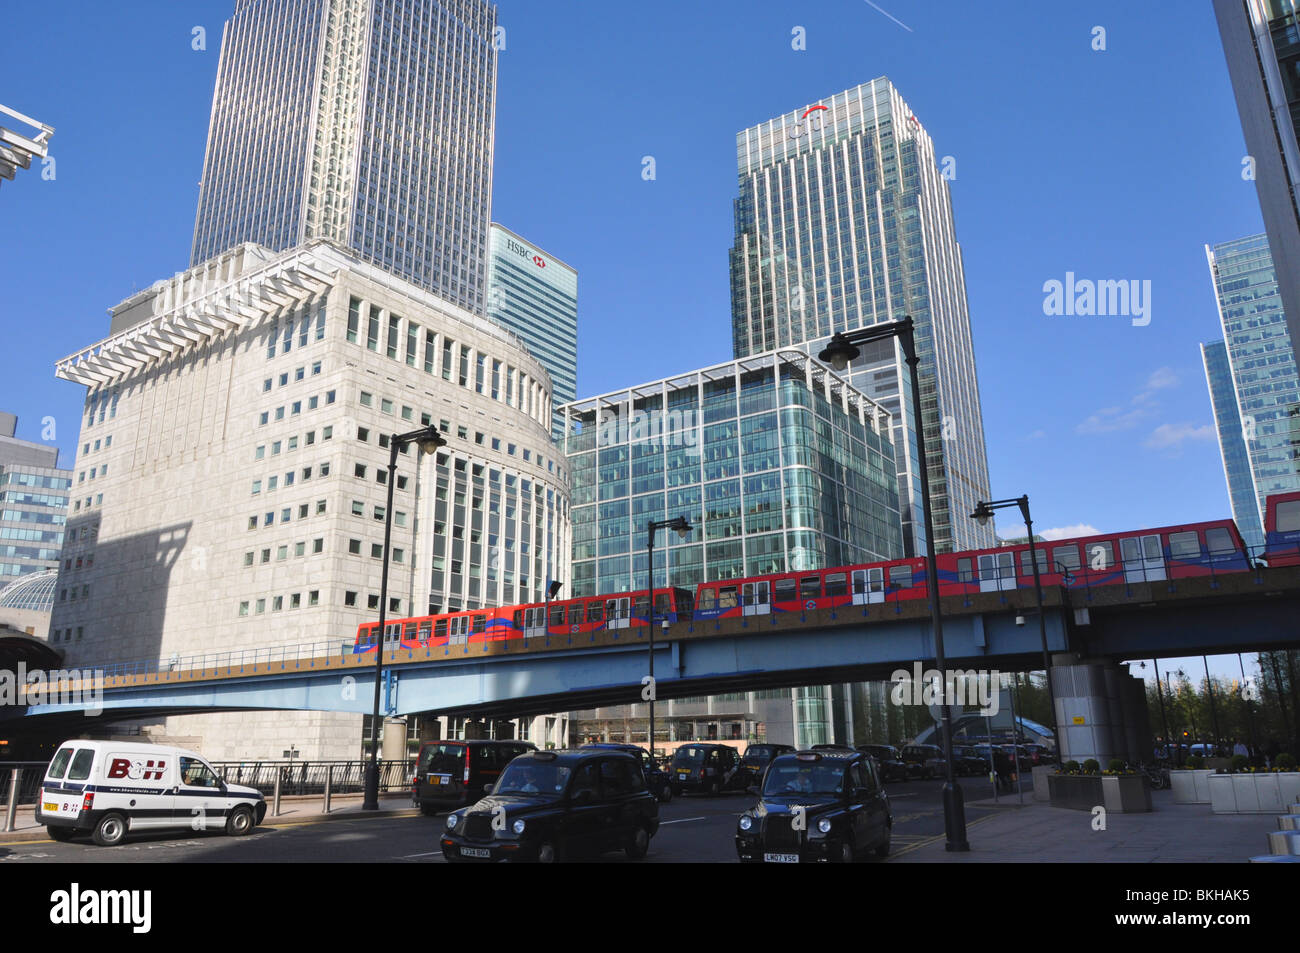 DLR Canary Wharf London England UK Banque D'Images